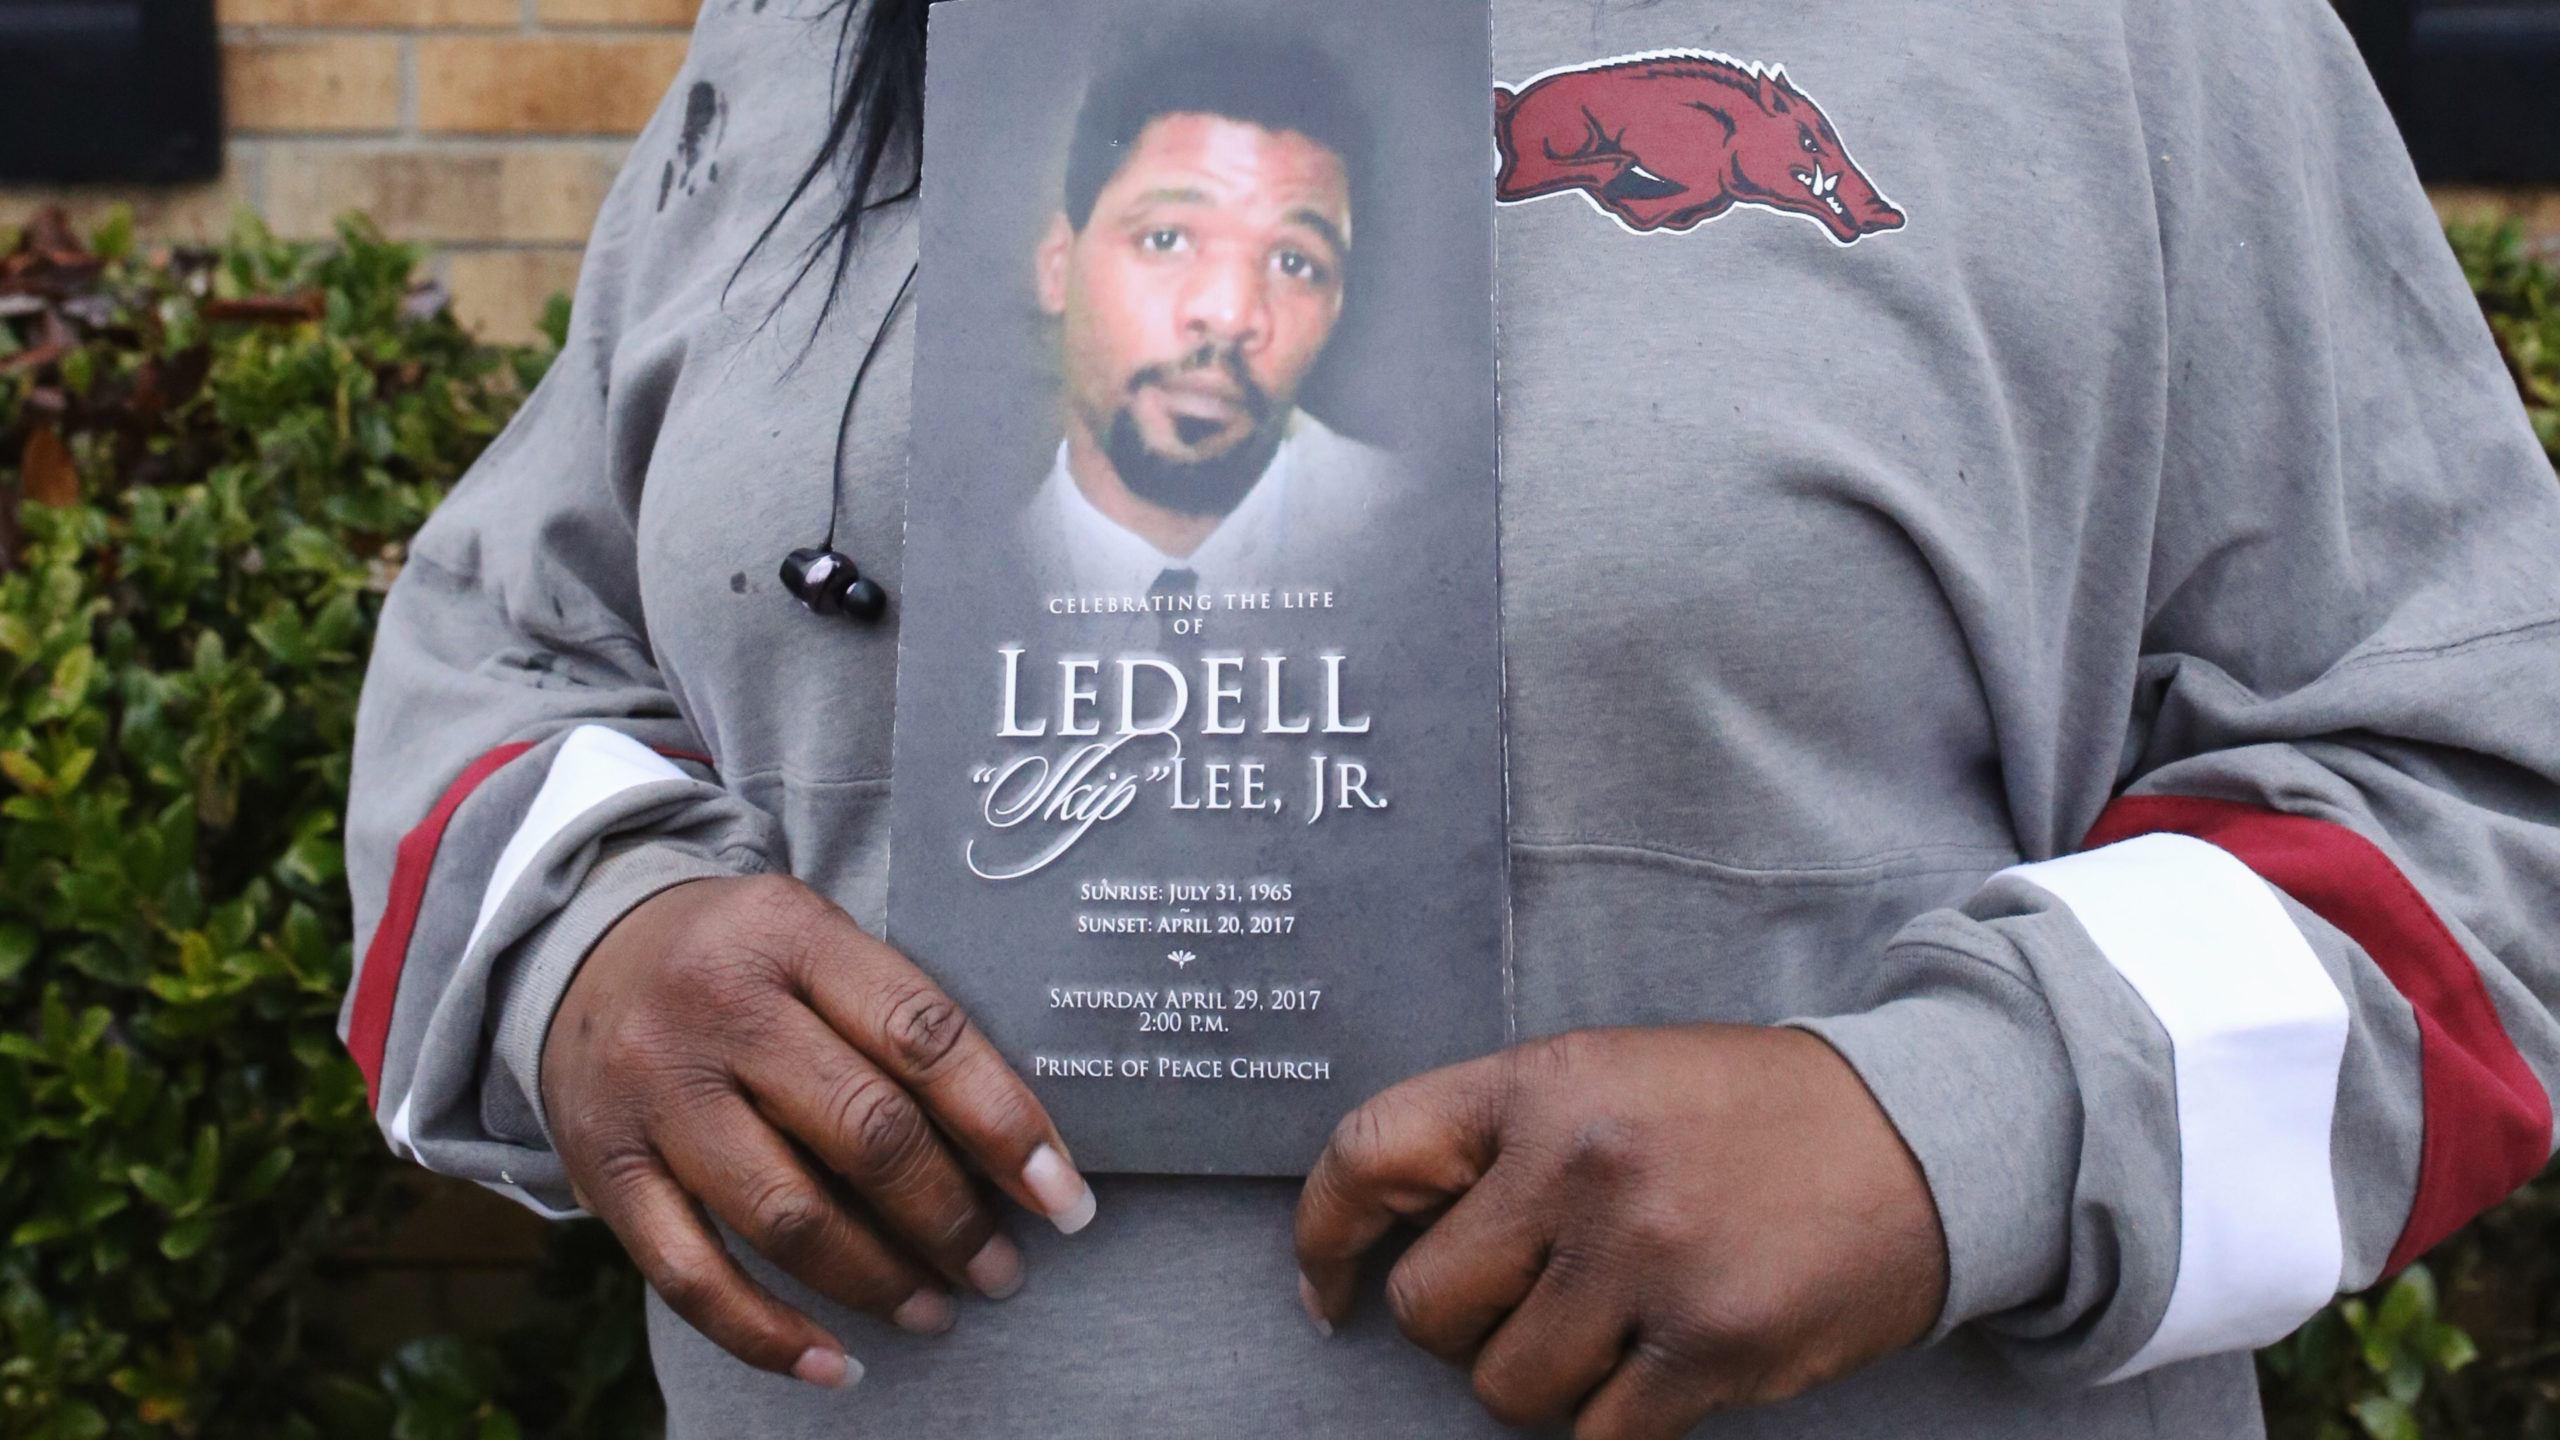 Patricia Young, Ledell Lee's sister, holds a memorial image of her brother. [Matt White/Innocence Project]